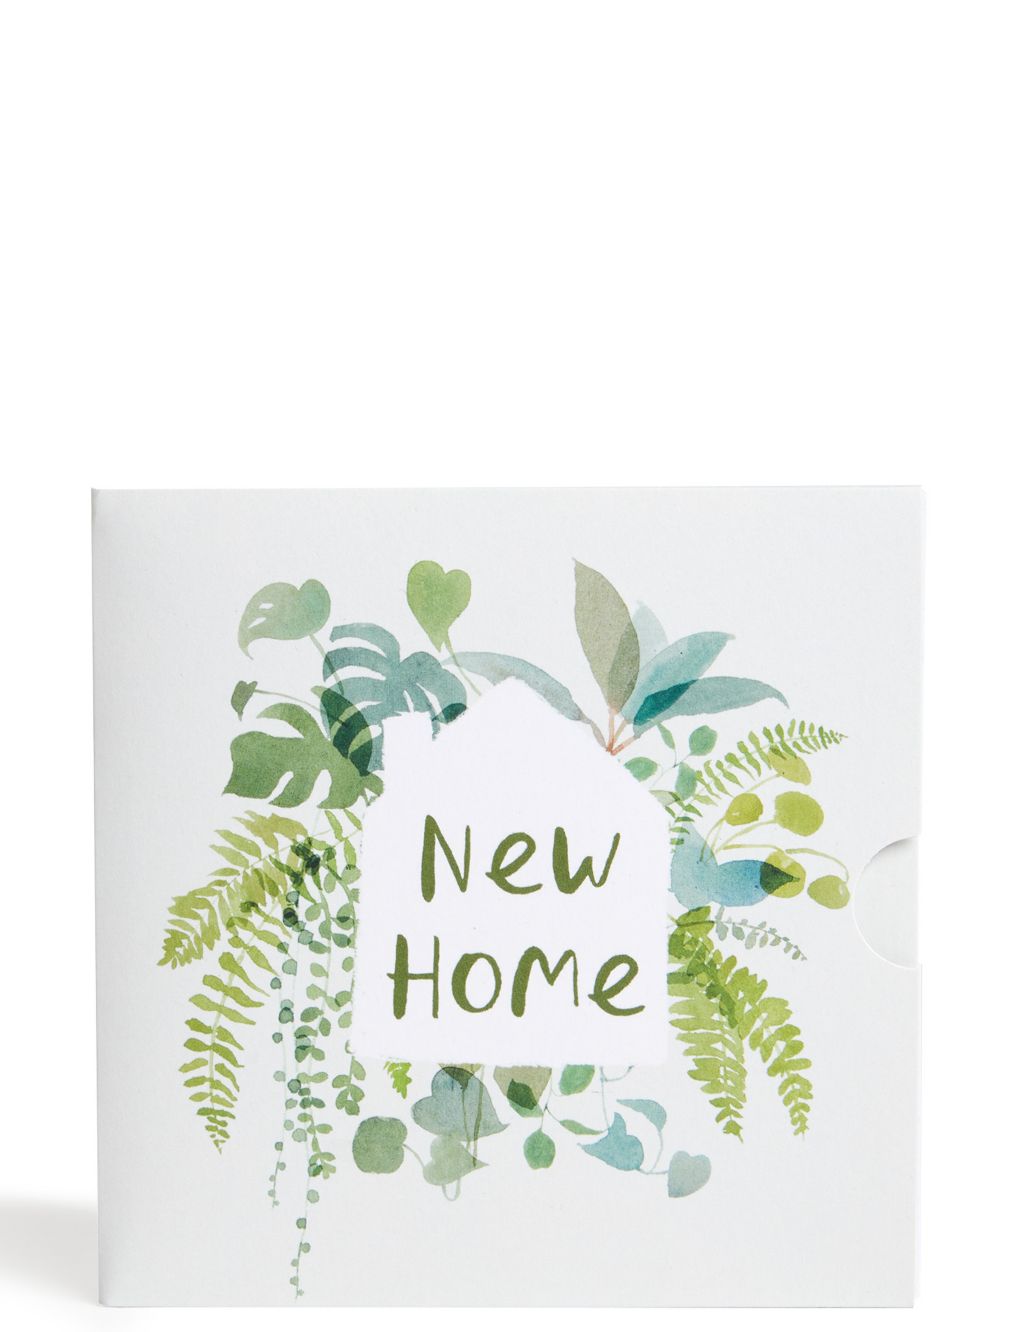 New Home Foliage Gift Card 3 of 4